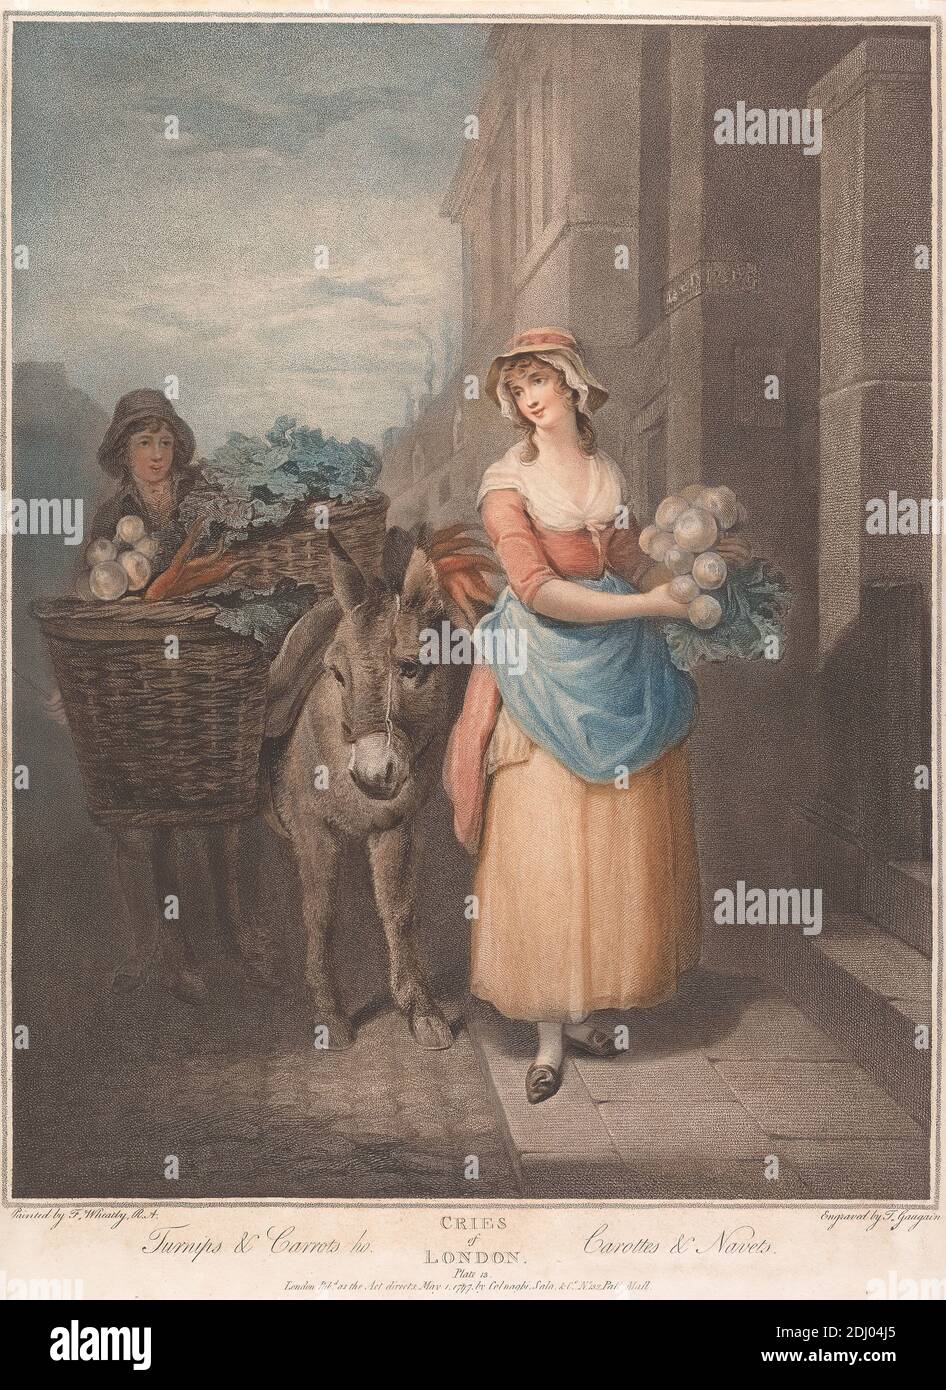 Cries of London, Turnips and Carrots, Thomas Gaugain, 1748–1812, French, after Francis Wheatley, 1747–1801, British, Published by Colnaghi, established 1760, active ca. 1785–1911, Italian, active in Britain, 1797, Colored stipple engraving and etching on moderately thick, slightly textured, cream laid paper, Sheet: 15 5/8 x 11 9/16 inches (39.7 x 29.3 cm) and Image: 14 1/4 x 11 1/4 inches (36.2 x 28.5 cm), baskets, bonnet, carrots, cobblestones, donkey, dress, food, genre subject, labor, man, merchant, peasants, selling, steps, street, turnips, vegetables, woman, working, England, Europe Stock Photo